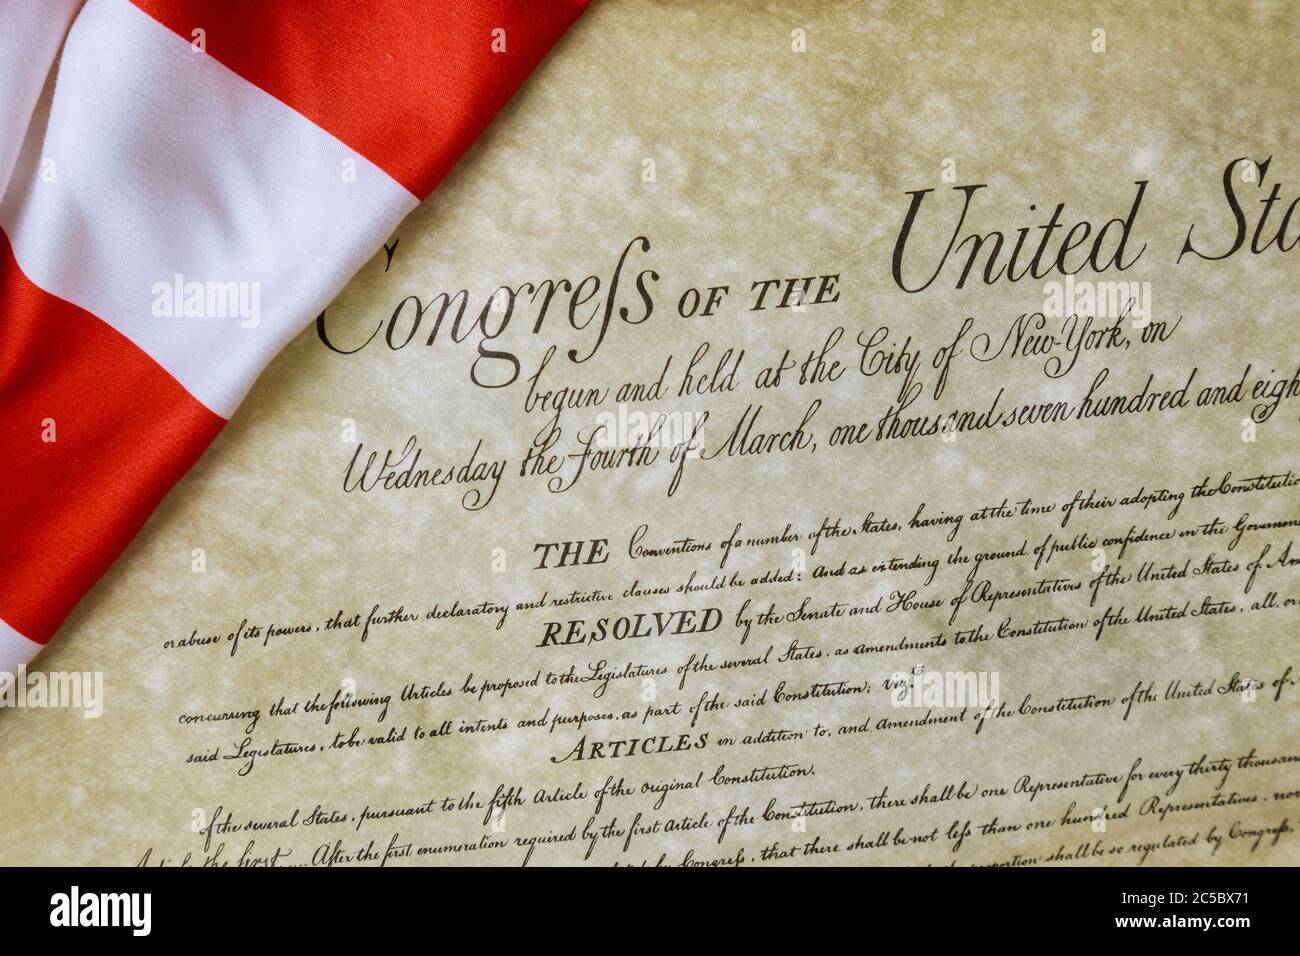 Preamble to the Constitution of the United States of America of closeup of ruffled American flag Stock Photo